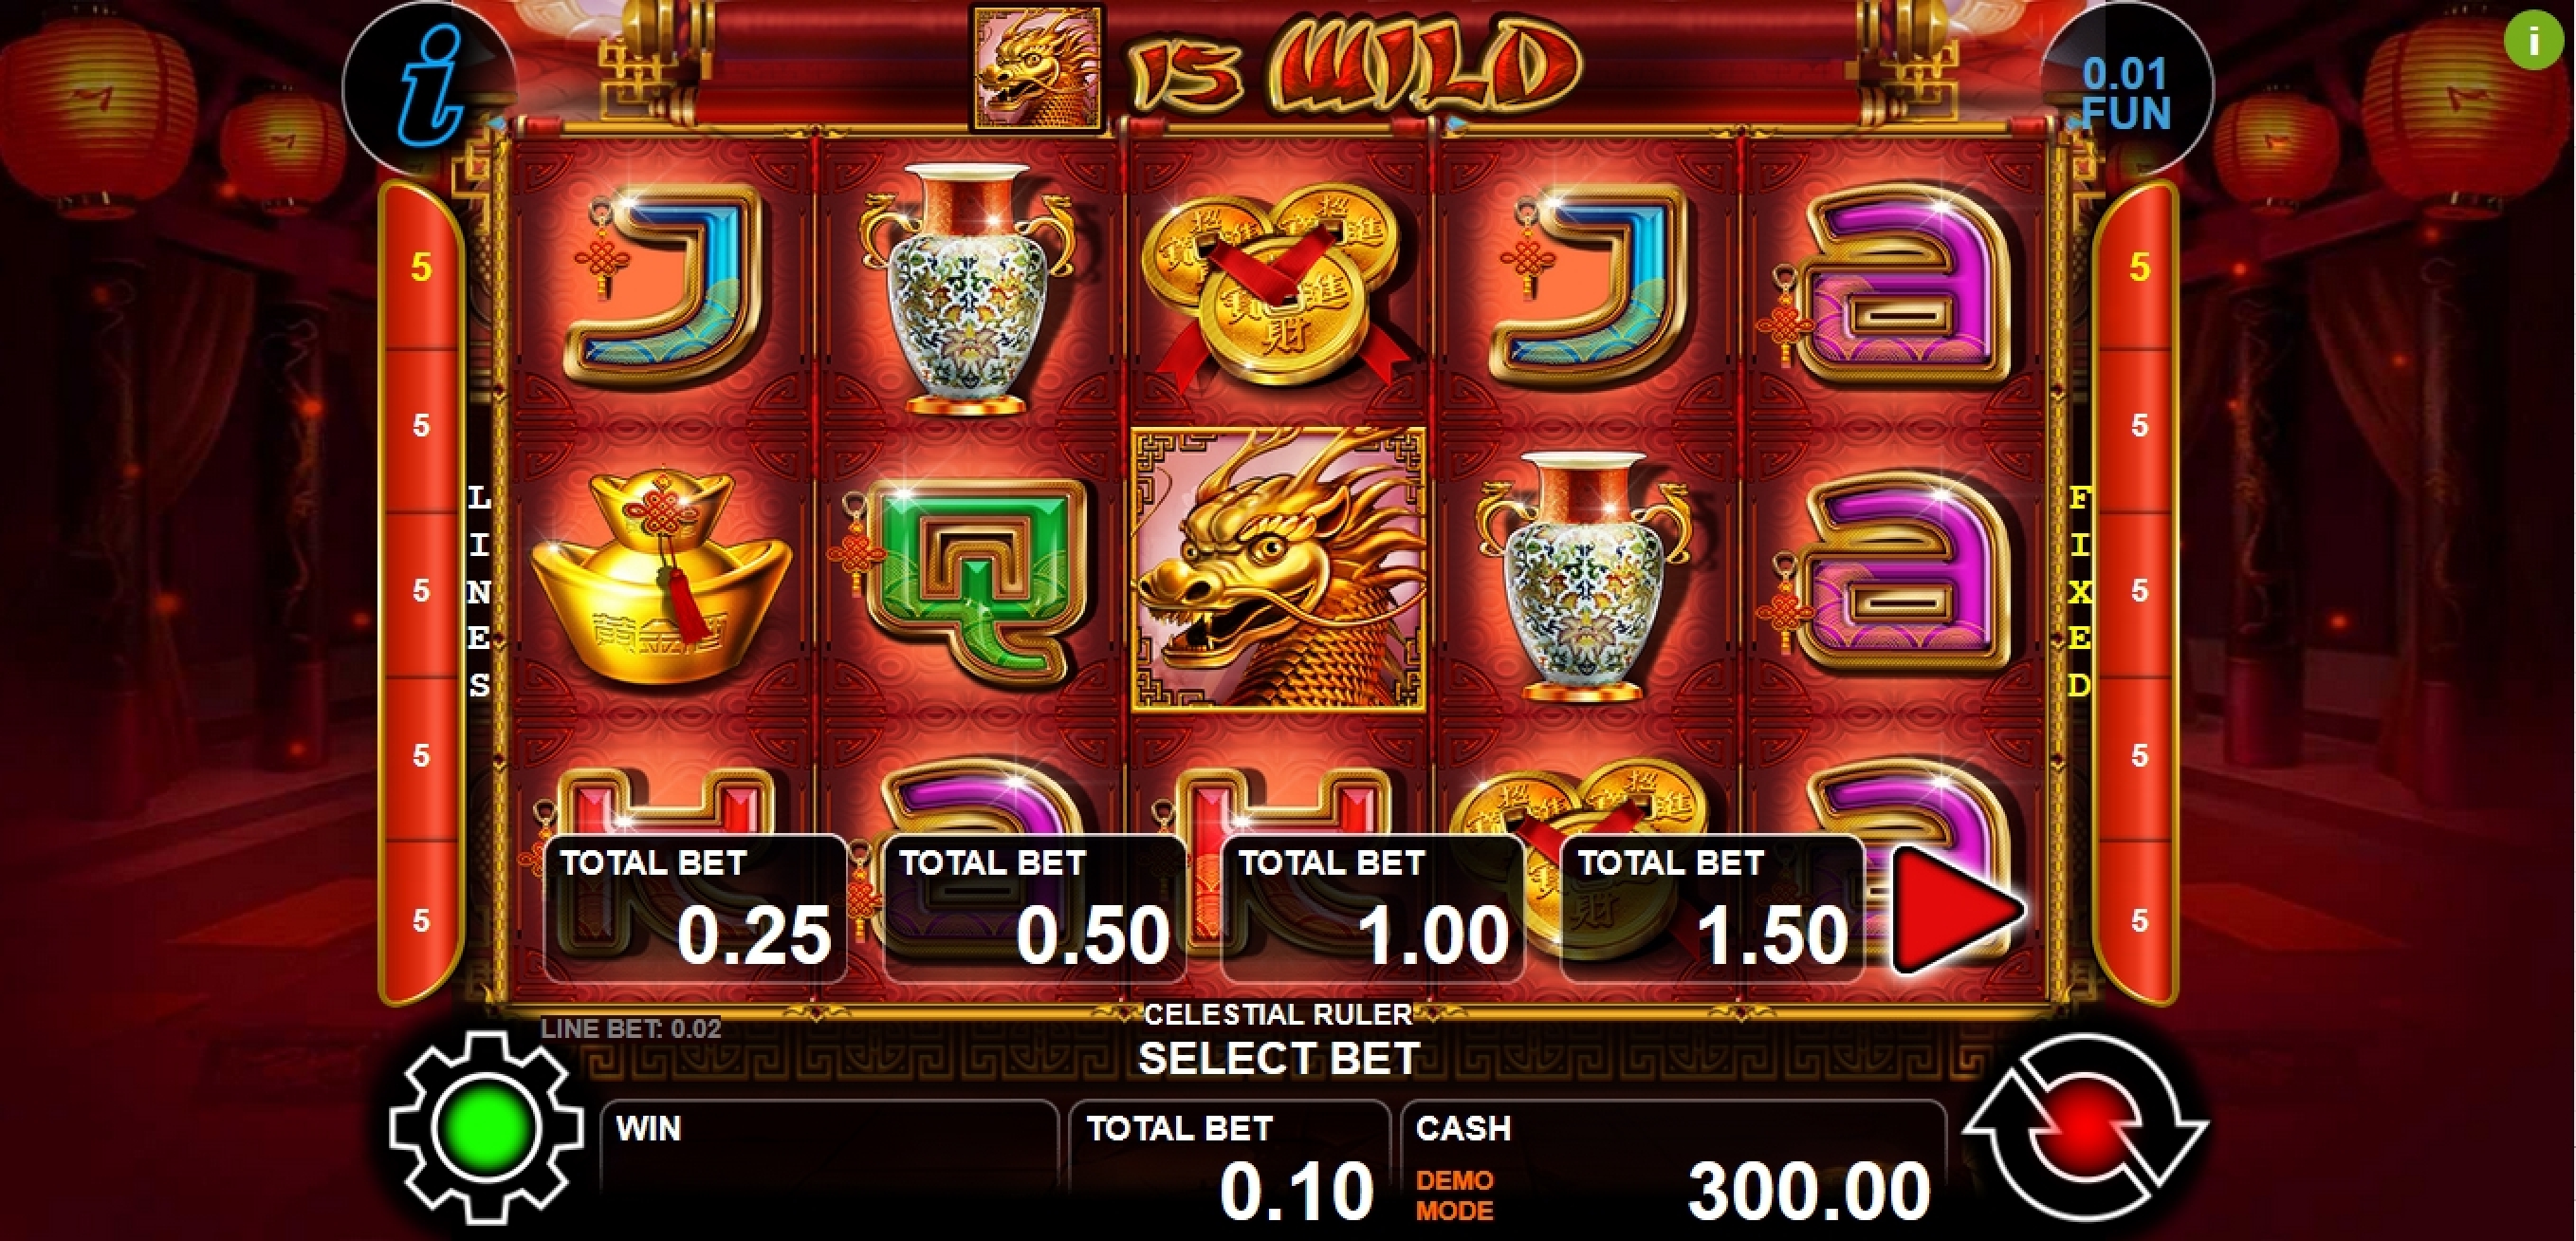 Reels in Celestial Ruler Slot Game by casino technology